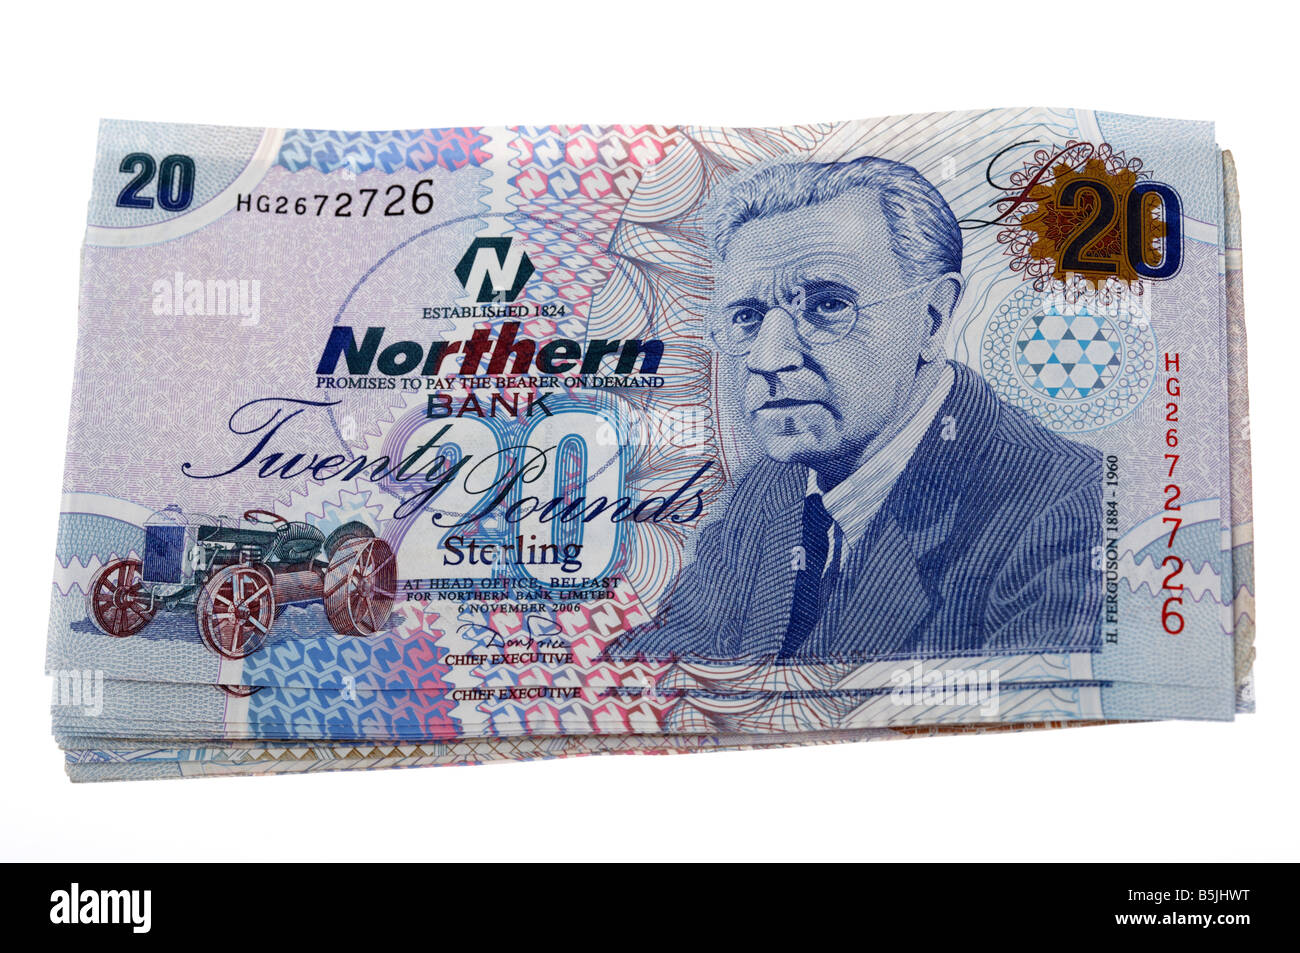 pile 20 pounds sterling northern ireland issued northern bank notes cash Stock Photo